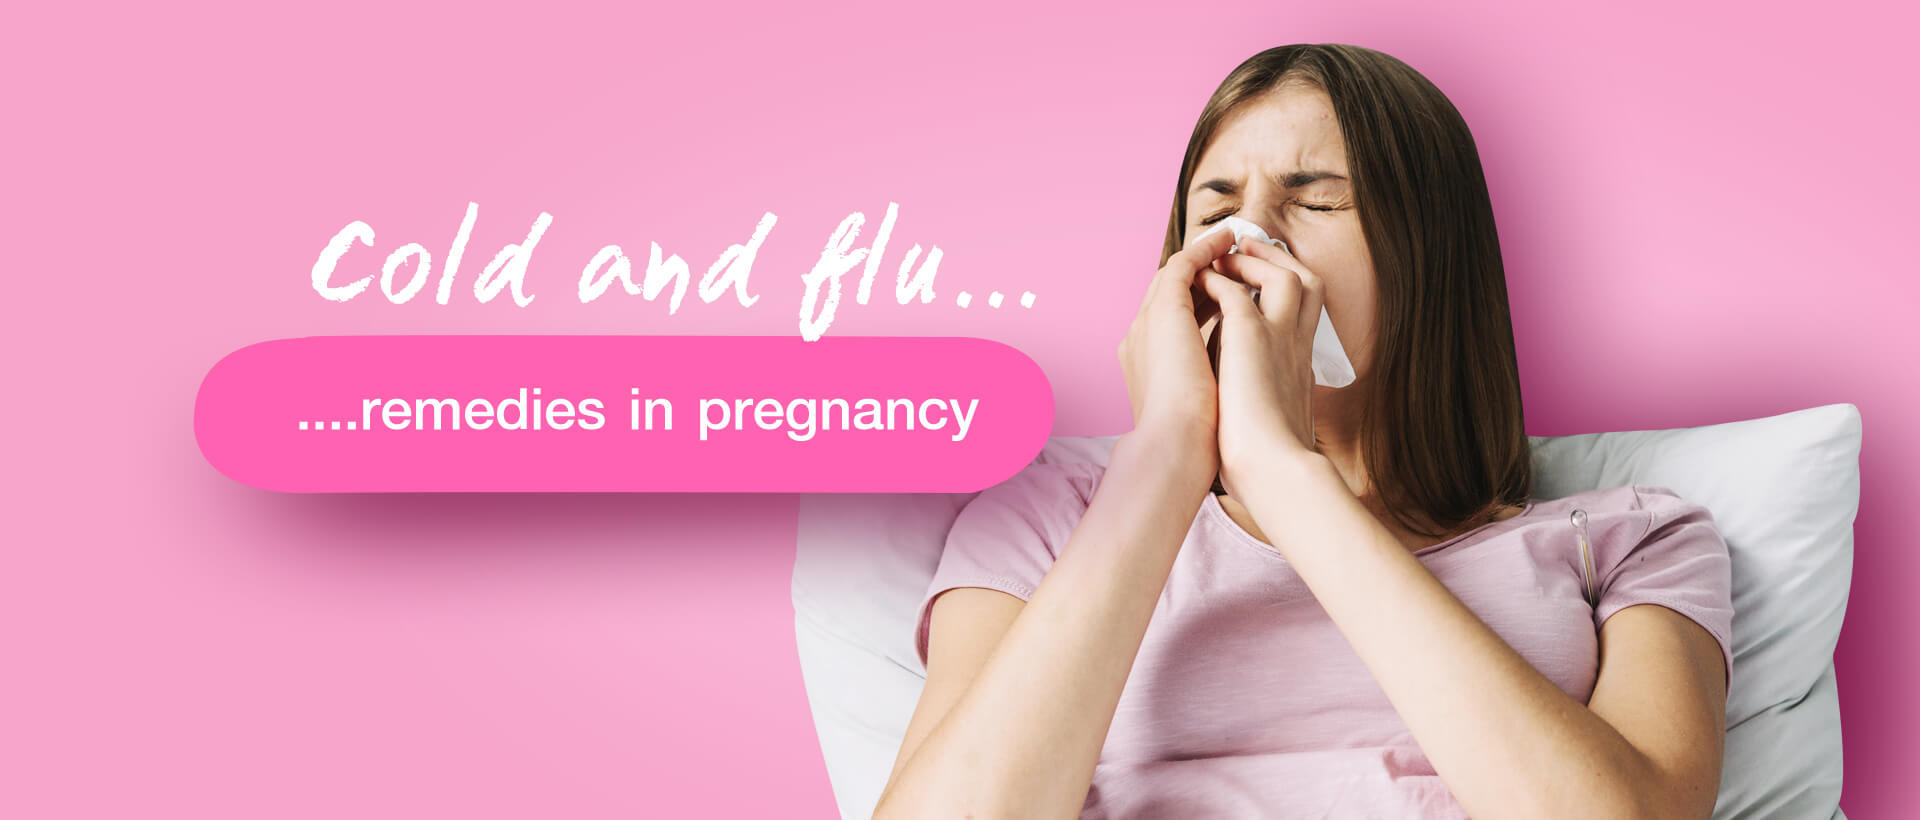 Cold and flu remedies in pregnancy